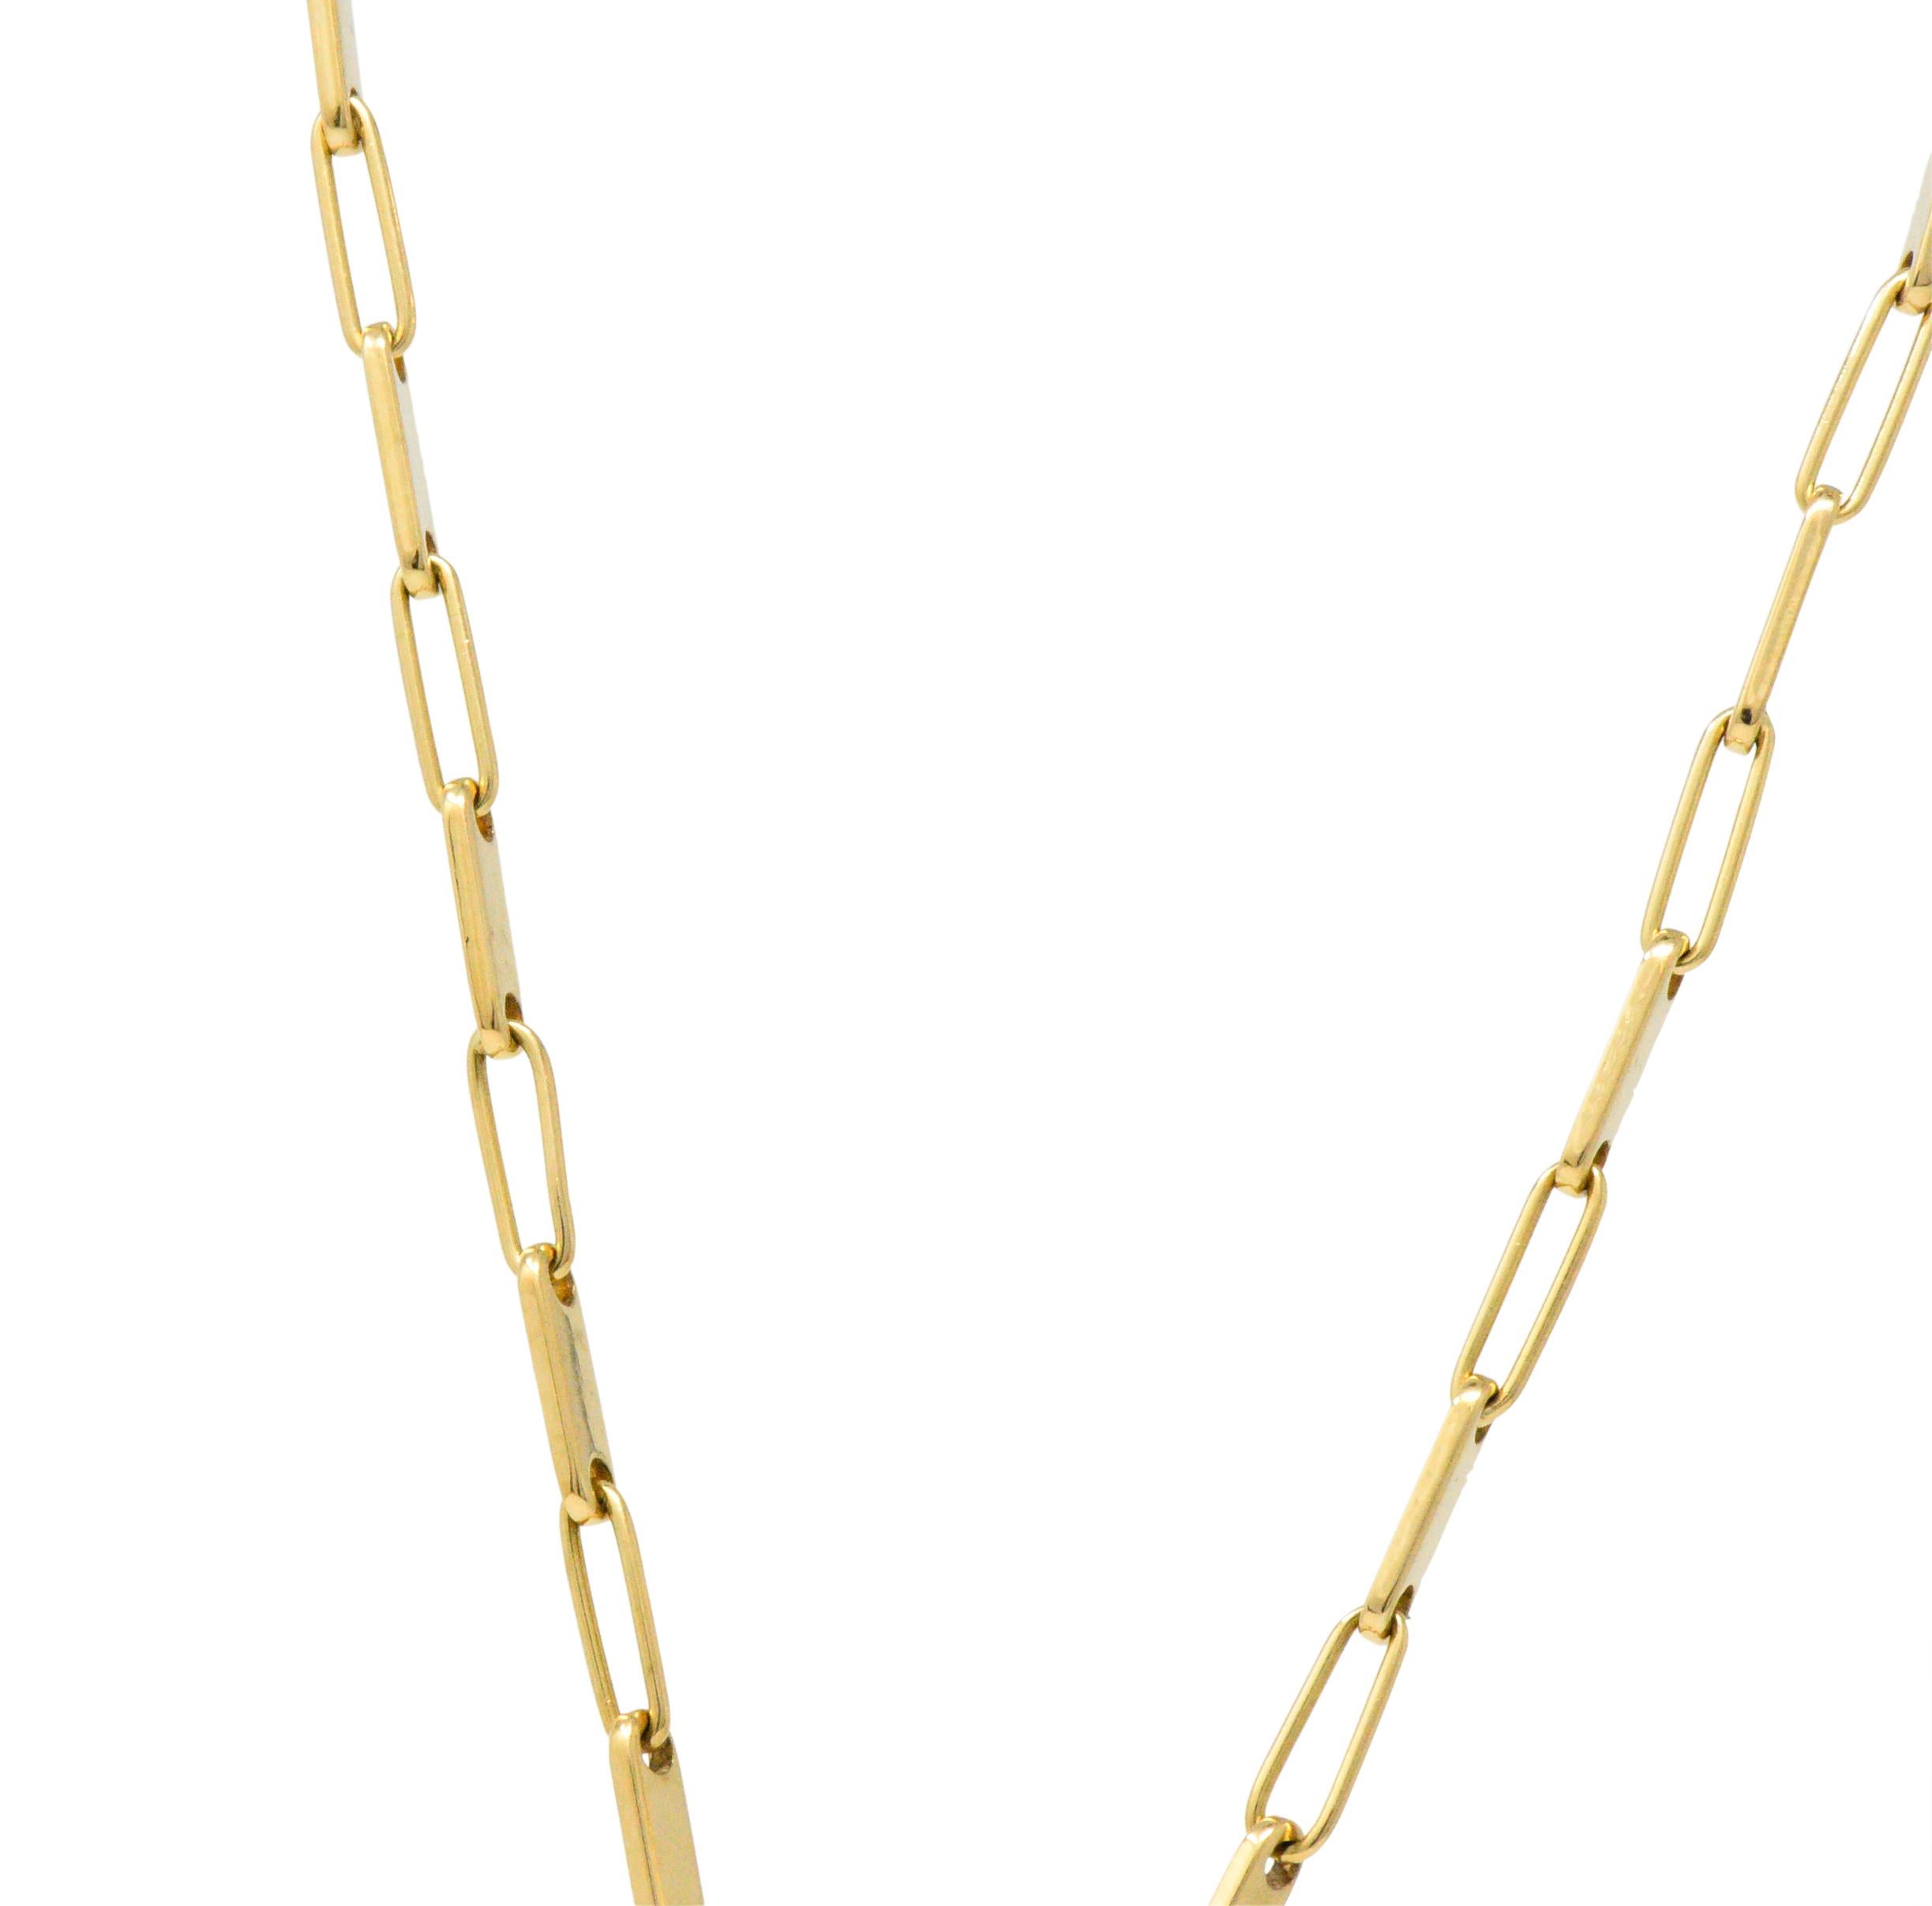 Designed as an articulated abstract fish, with round brilliant cut diamond eyes and accents, approximately 0.10 carats total, white and eye-clean

Bright polished gold sections of the fish move well and give the necklace whimsy

On a bar and link